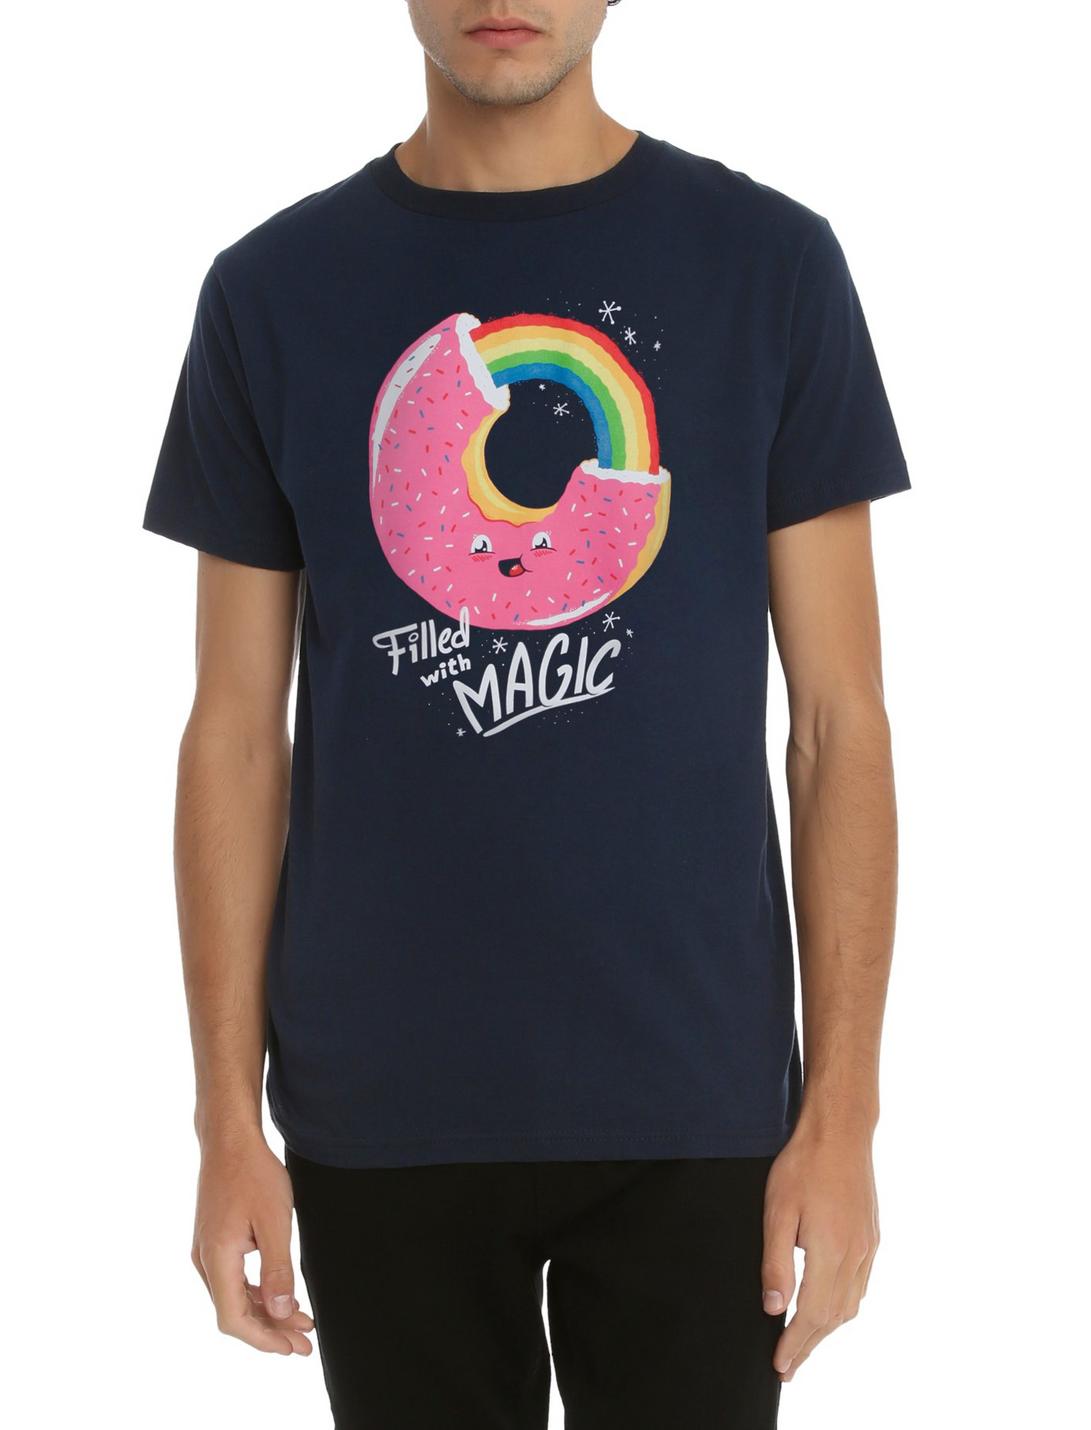 Baked With Love T-Shirt, BLACK, hi-res